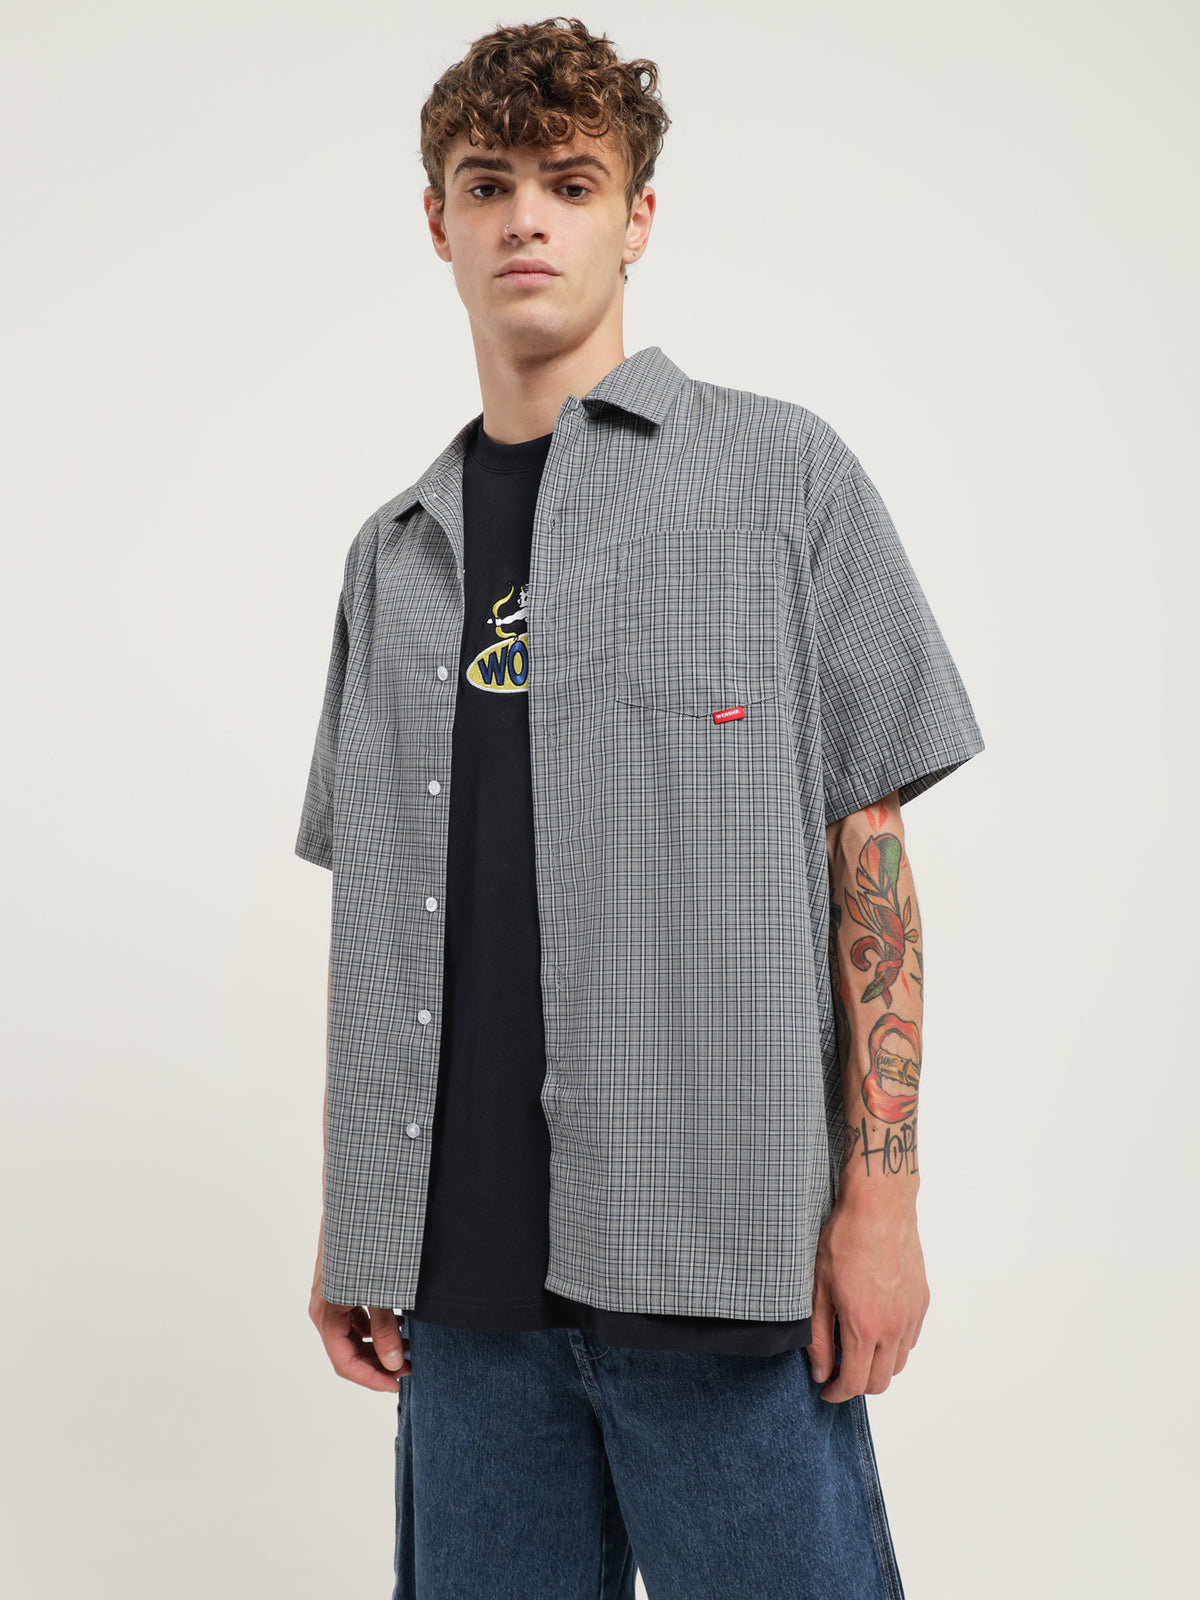 Fly Blown Short Sleeve Shirt in Check